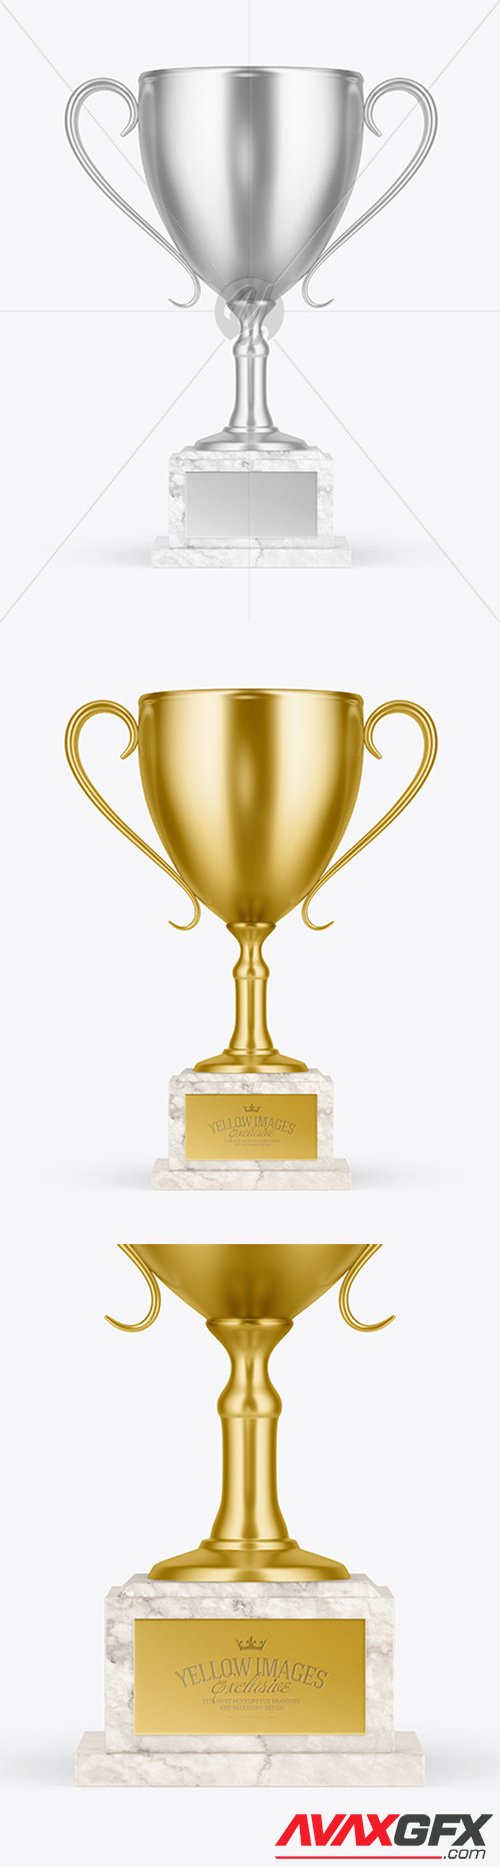 Winner Cup with Marble Stand Mockup 63461